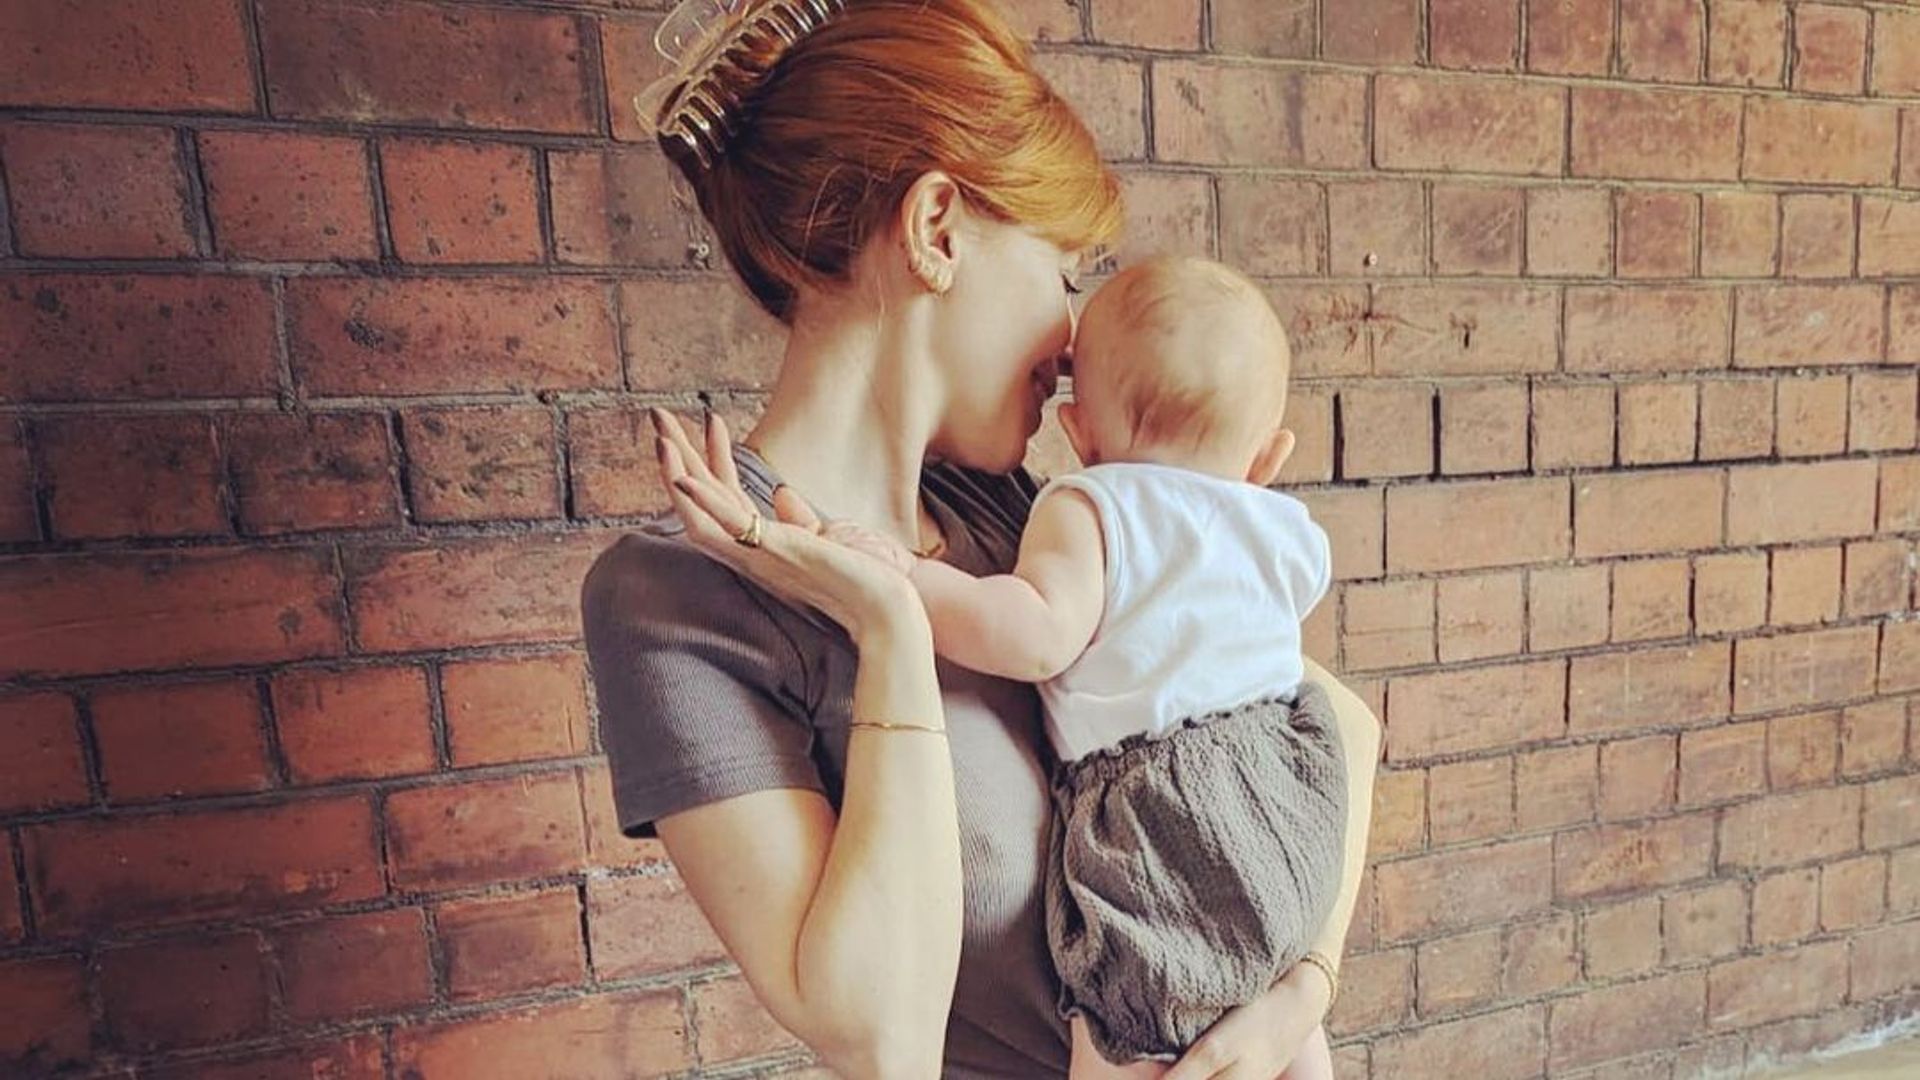 Stacey Dooley dotes on baby Minnie